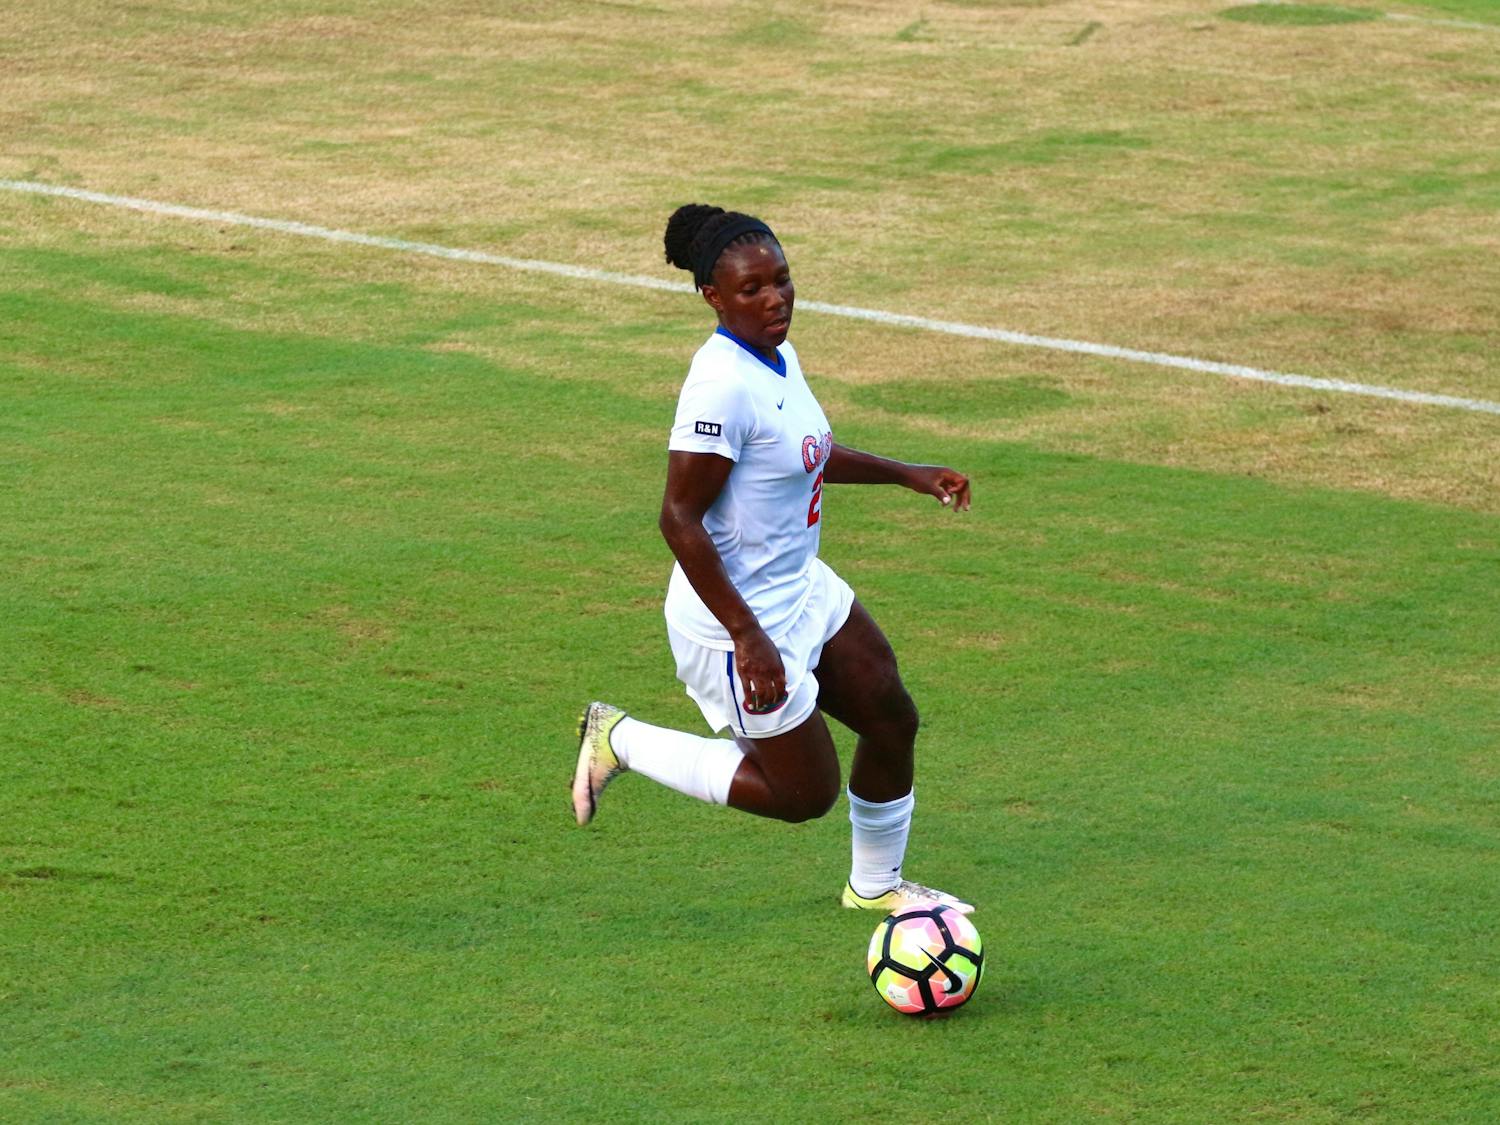 UF forward Deanne Rose runs with the ball during Florida's 2-1 win against Syracuse on Aug. 27, 2017, at Donald R. Dizney Stadium.